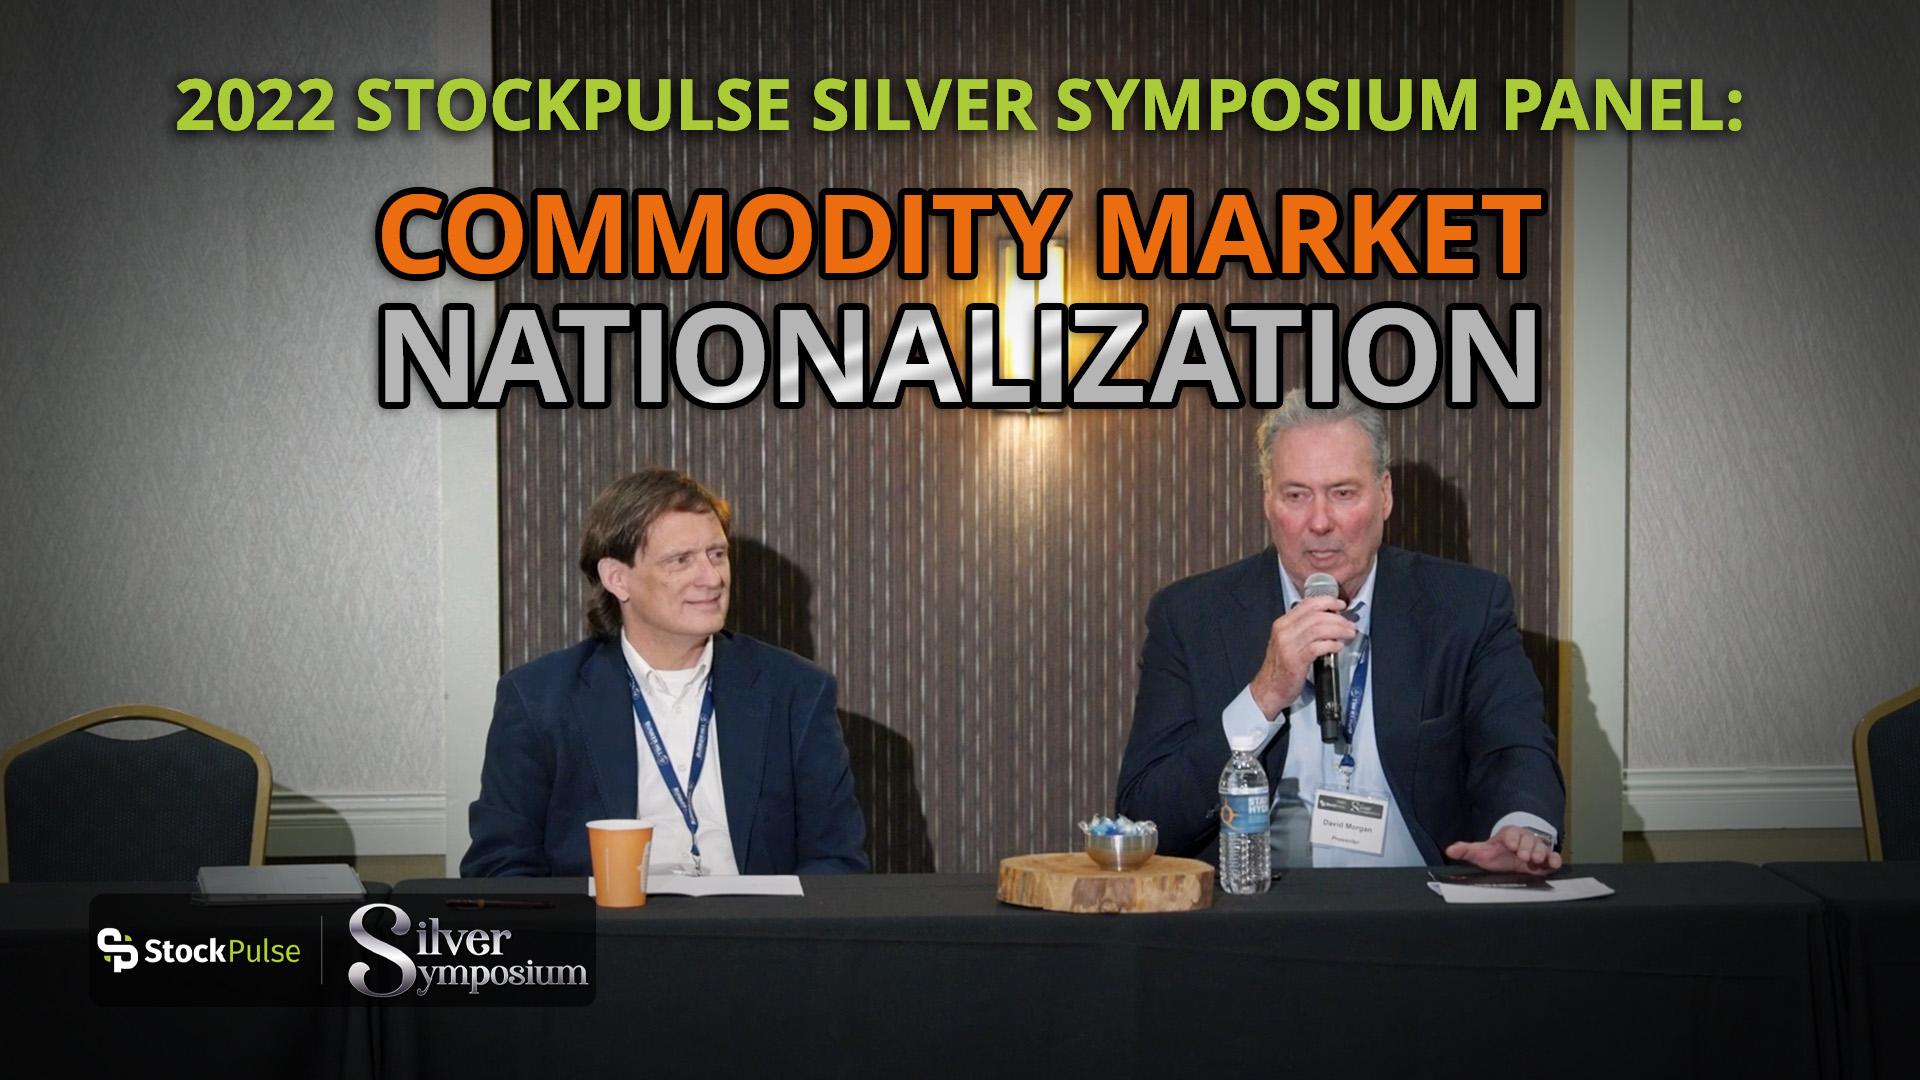 Panel Discussion – Commodity Market Nationalization